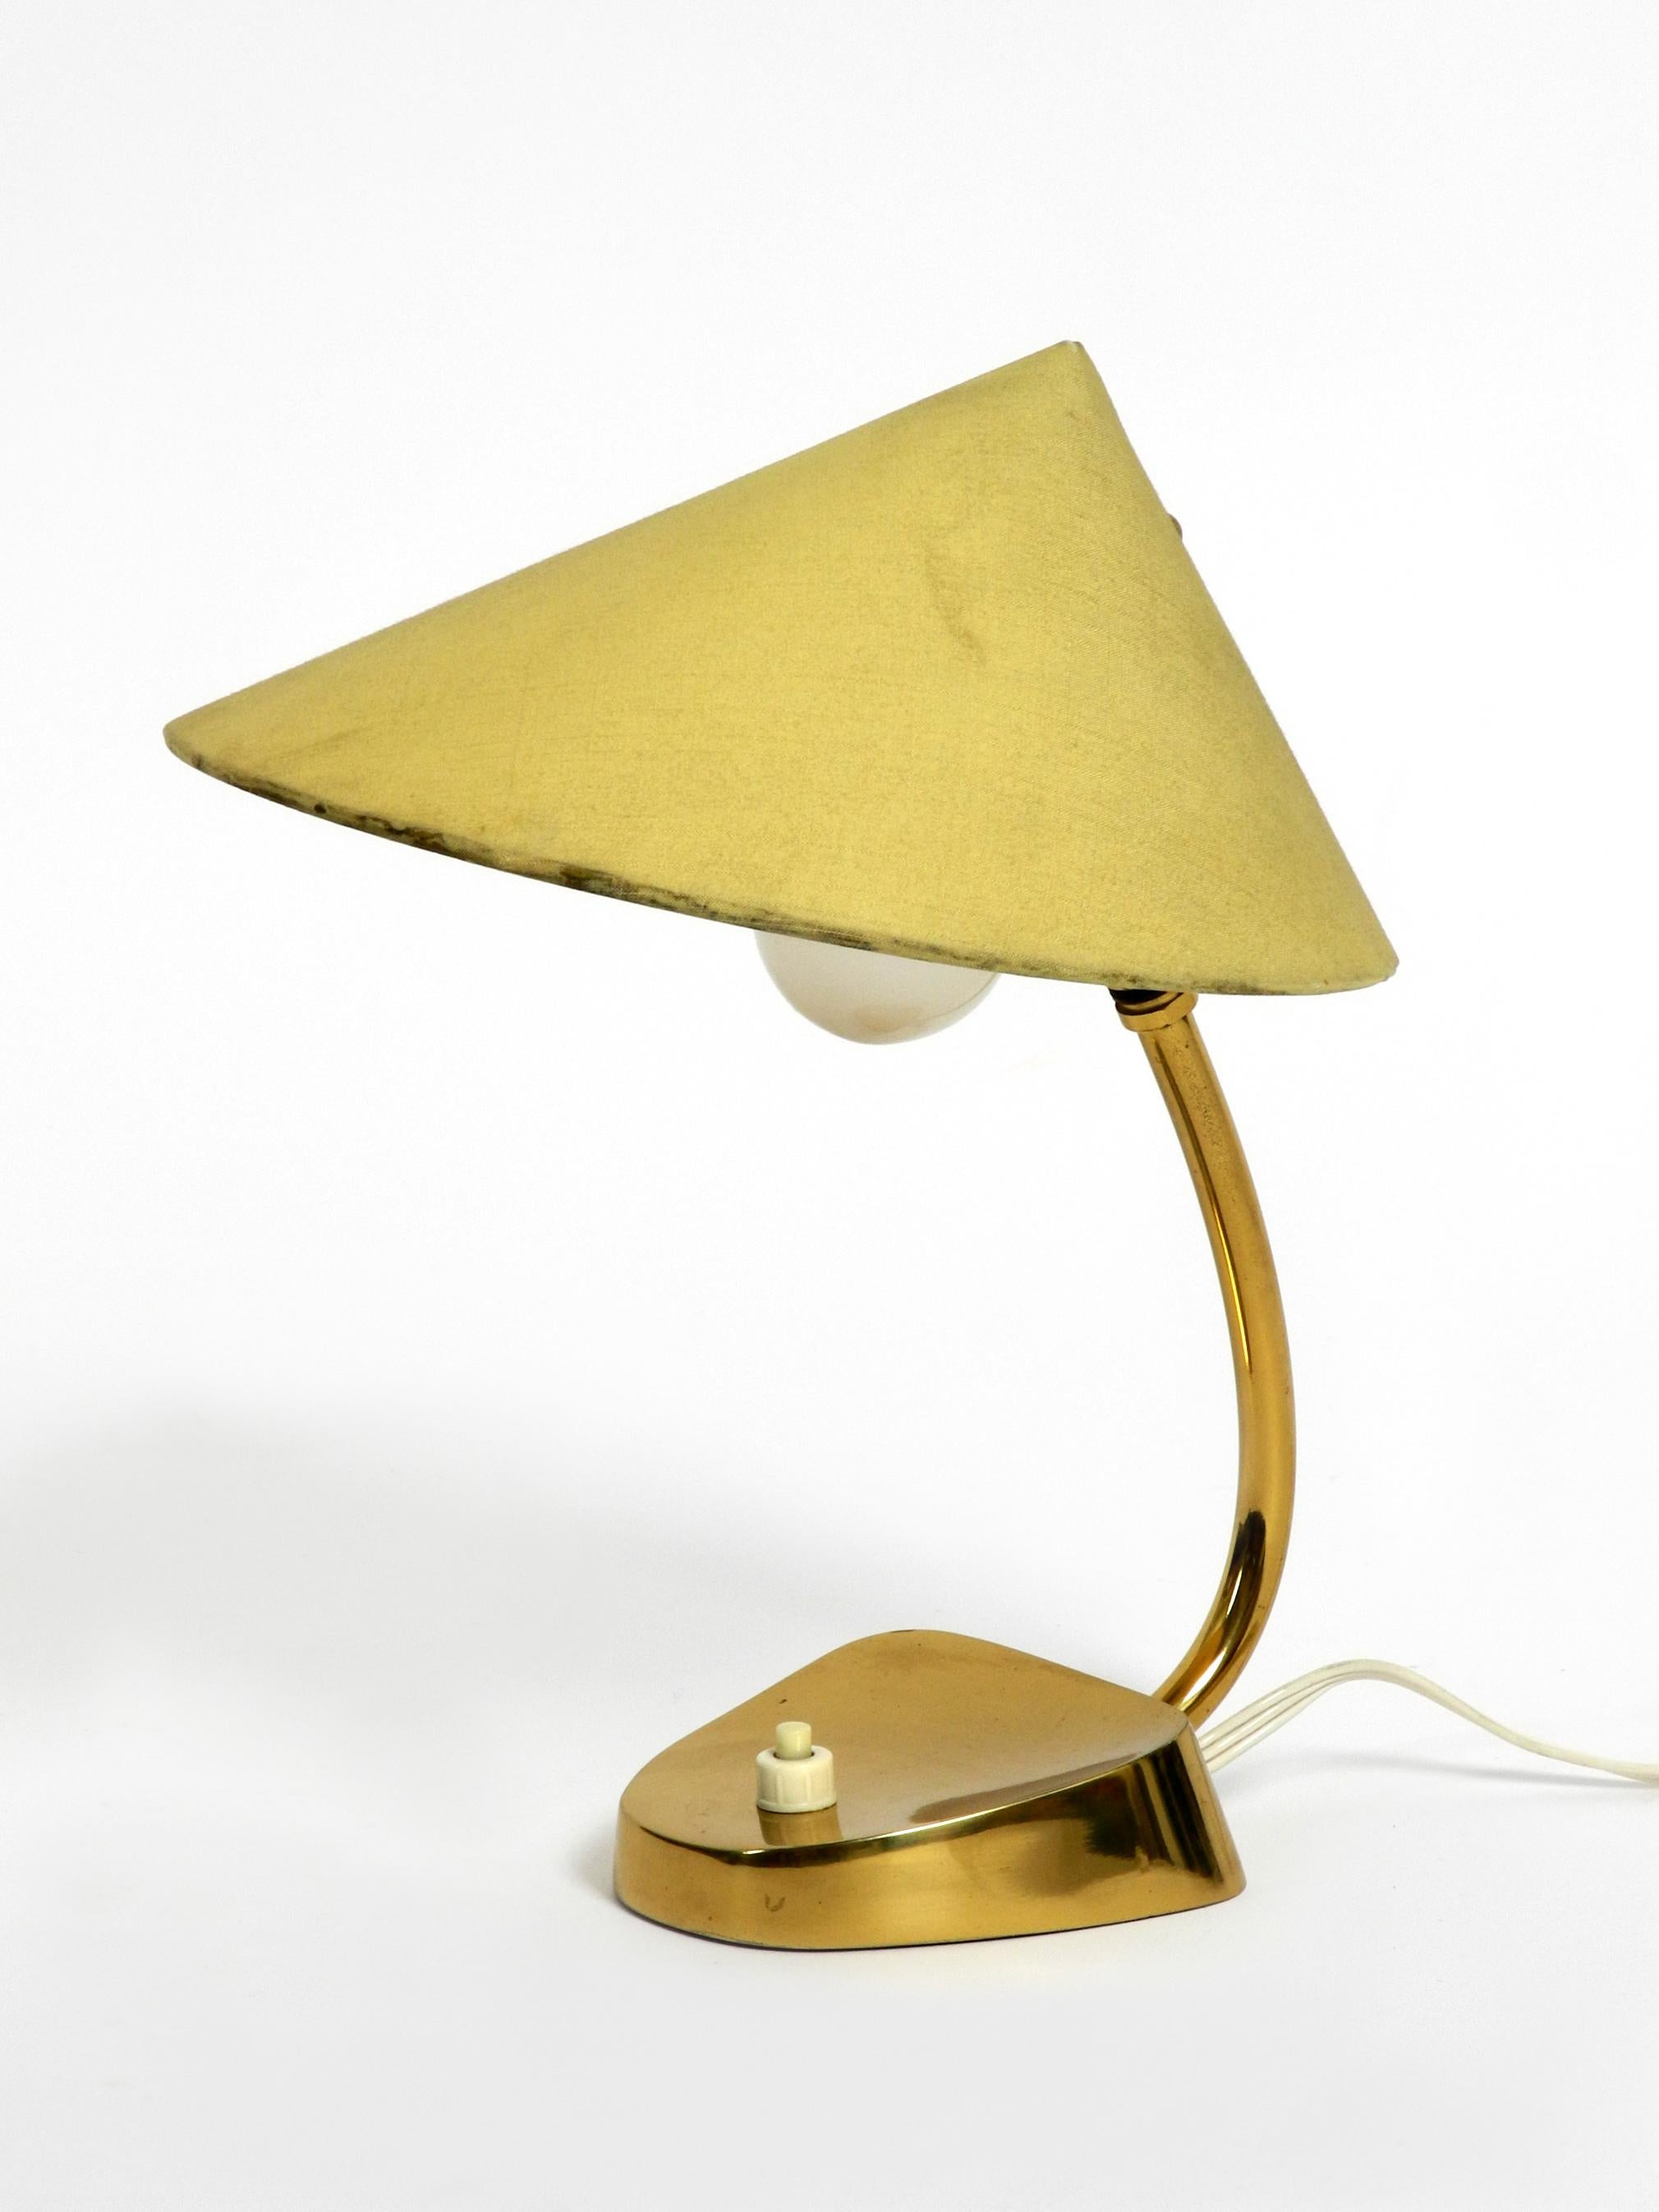 Very Rare Midcentury Brass Table Lamp with Fabric Shade by J. T. Kalmar Austria For Sale 4